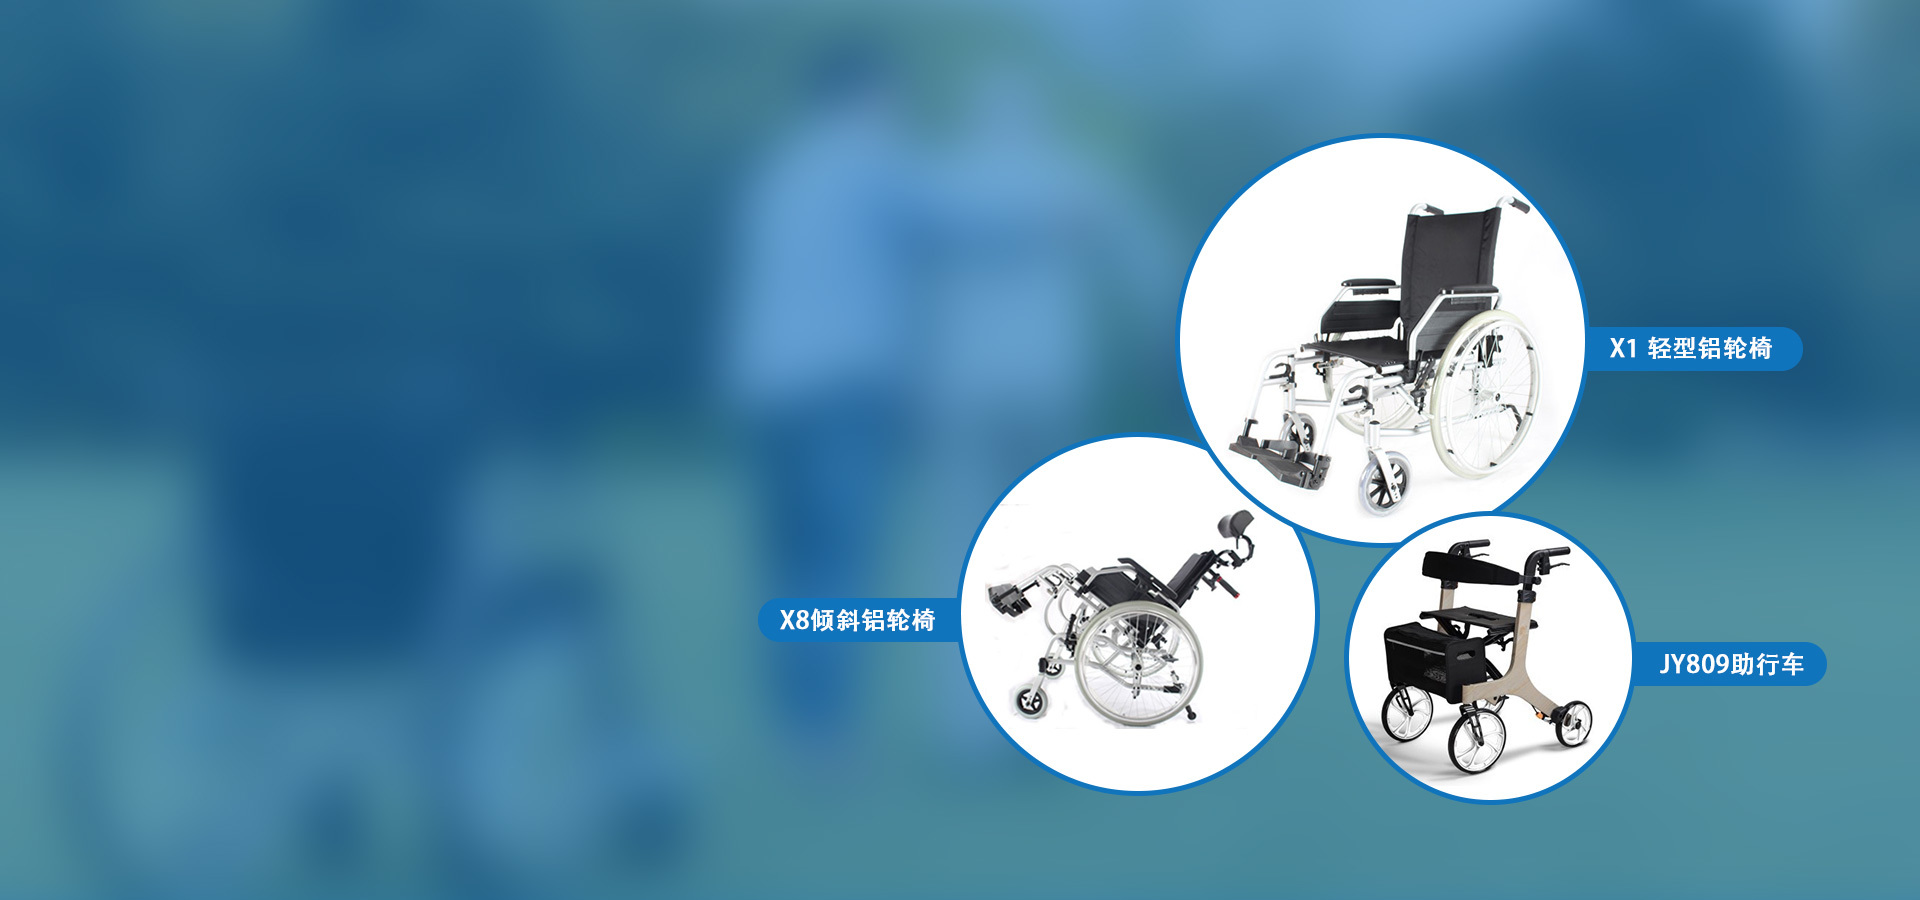 Specializing in the production of wheelchair, bath chair and other medical devices